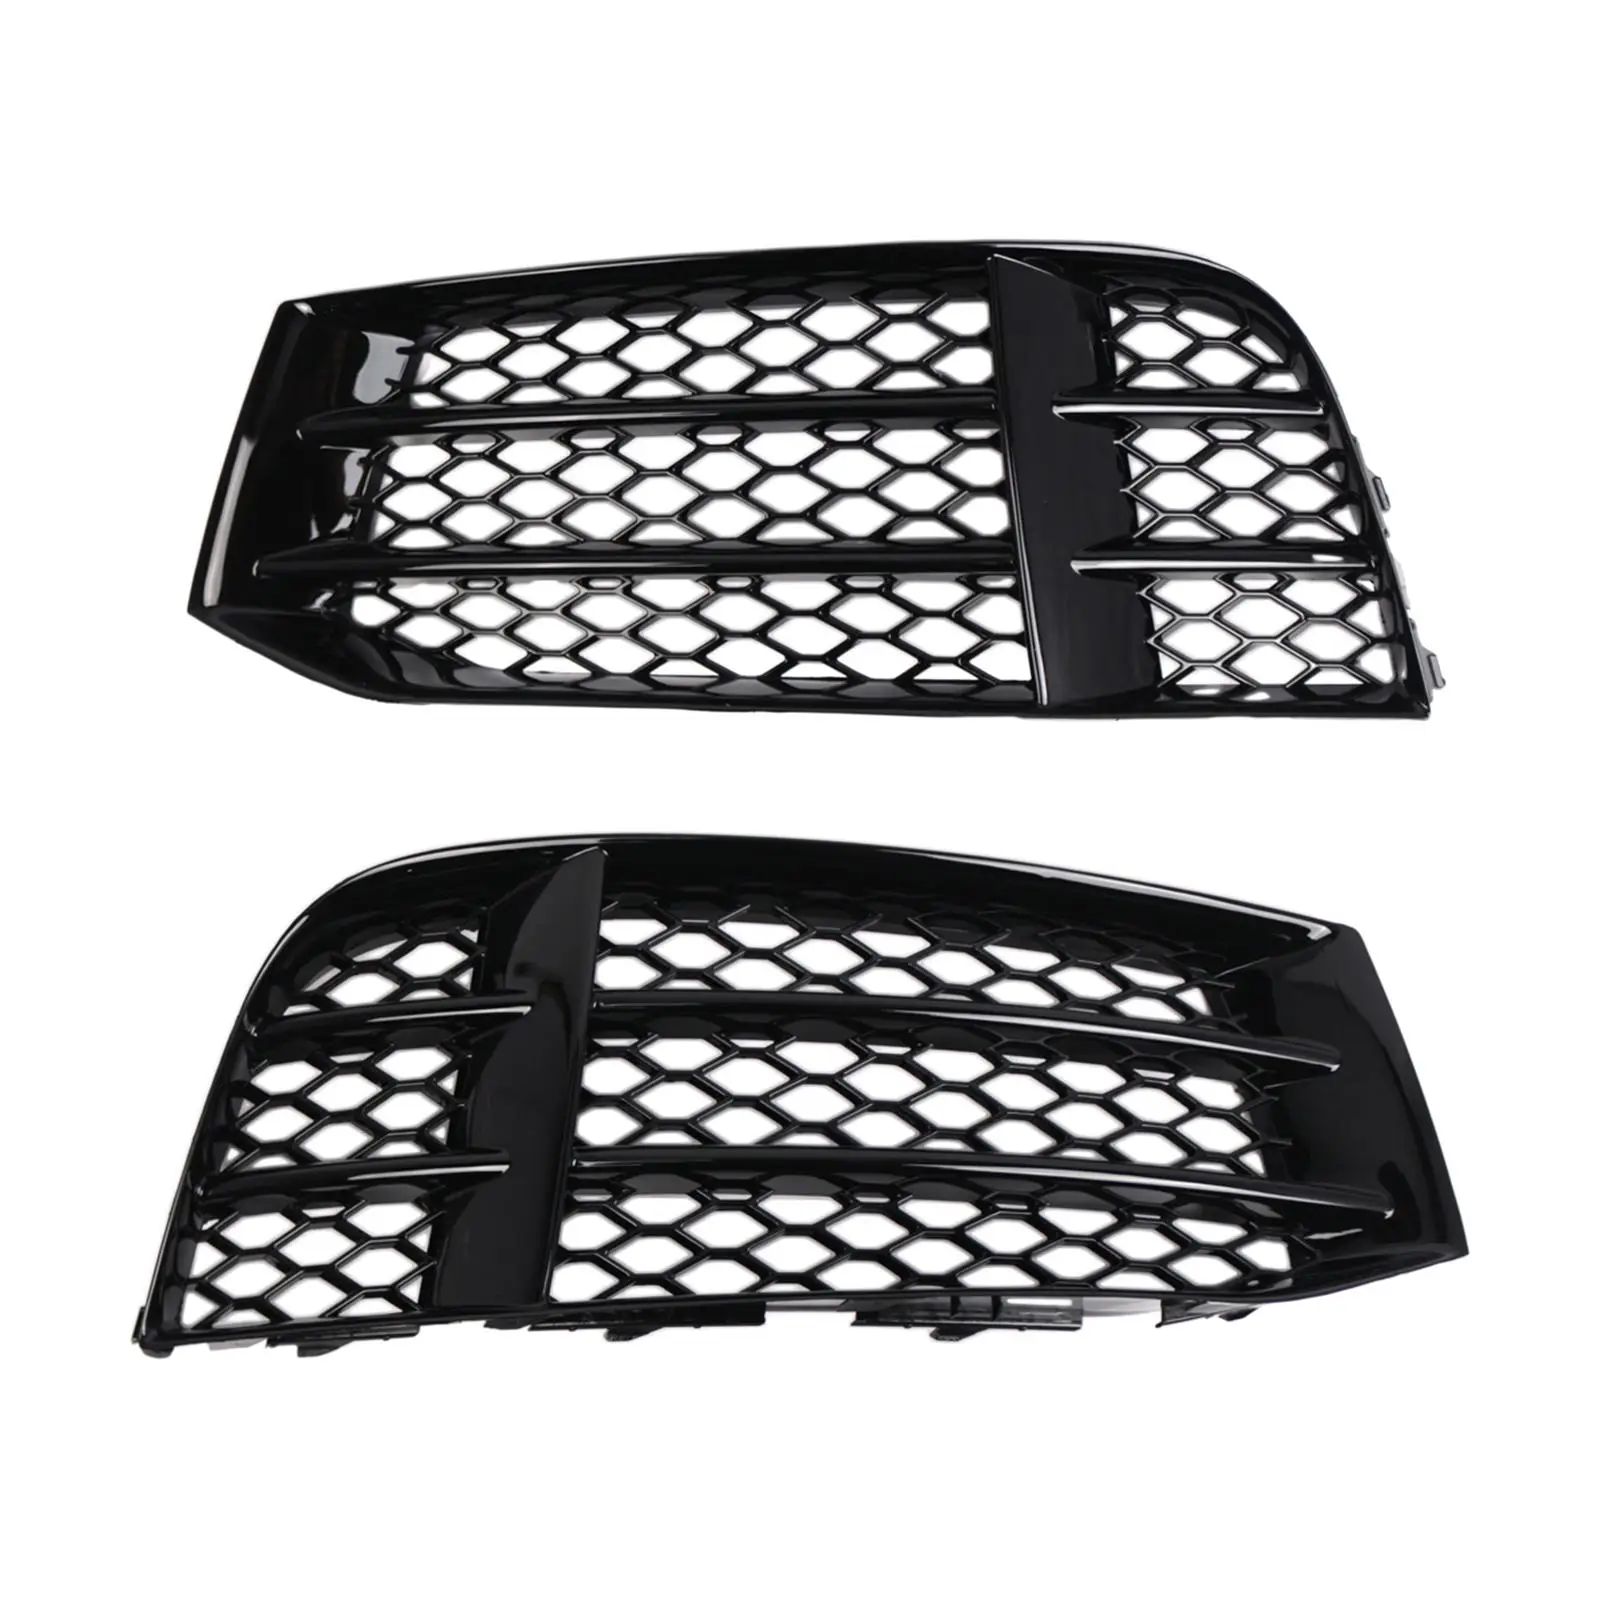 2x Front Bumper Lower Covers Grills Guards Durable 8T0807681F 8T0807682F for RS5C Cabriolet Automobile Repairing Accessory